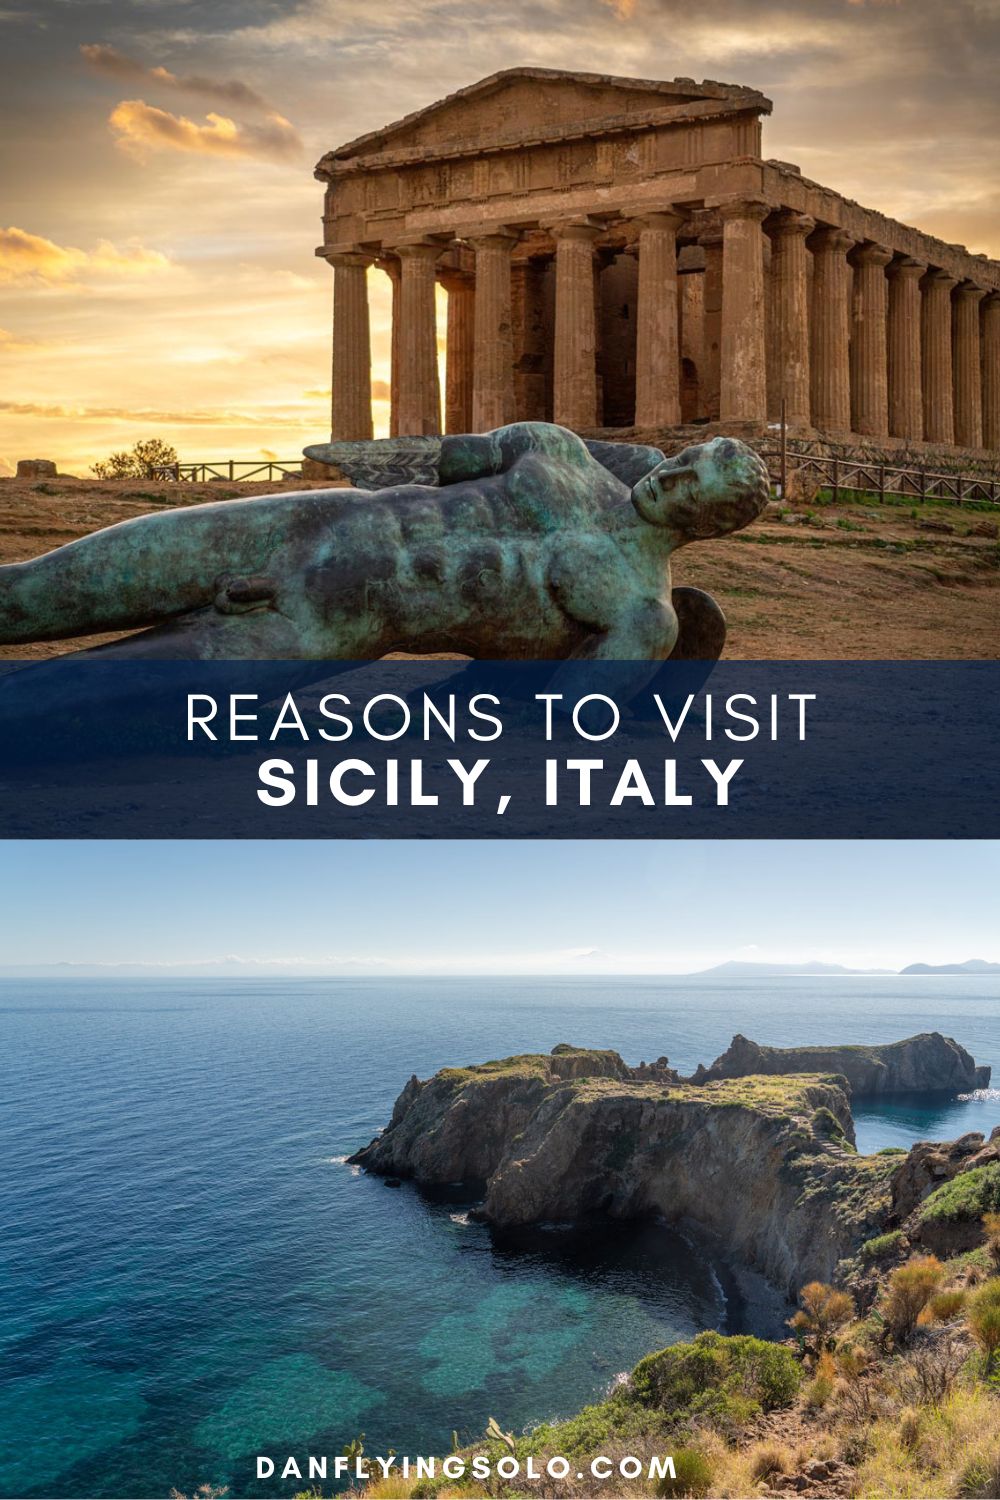 Reasons to visit Sicily, Italy's island that's certainly worth exploring!